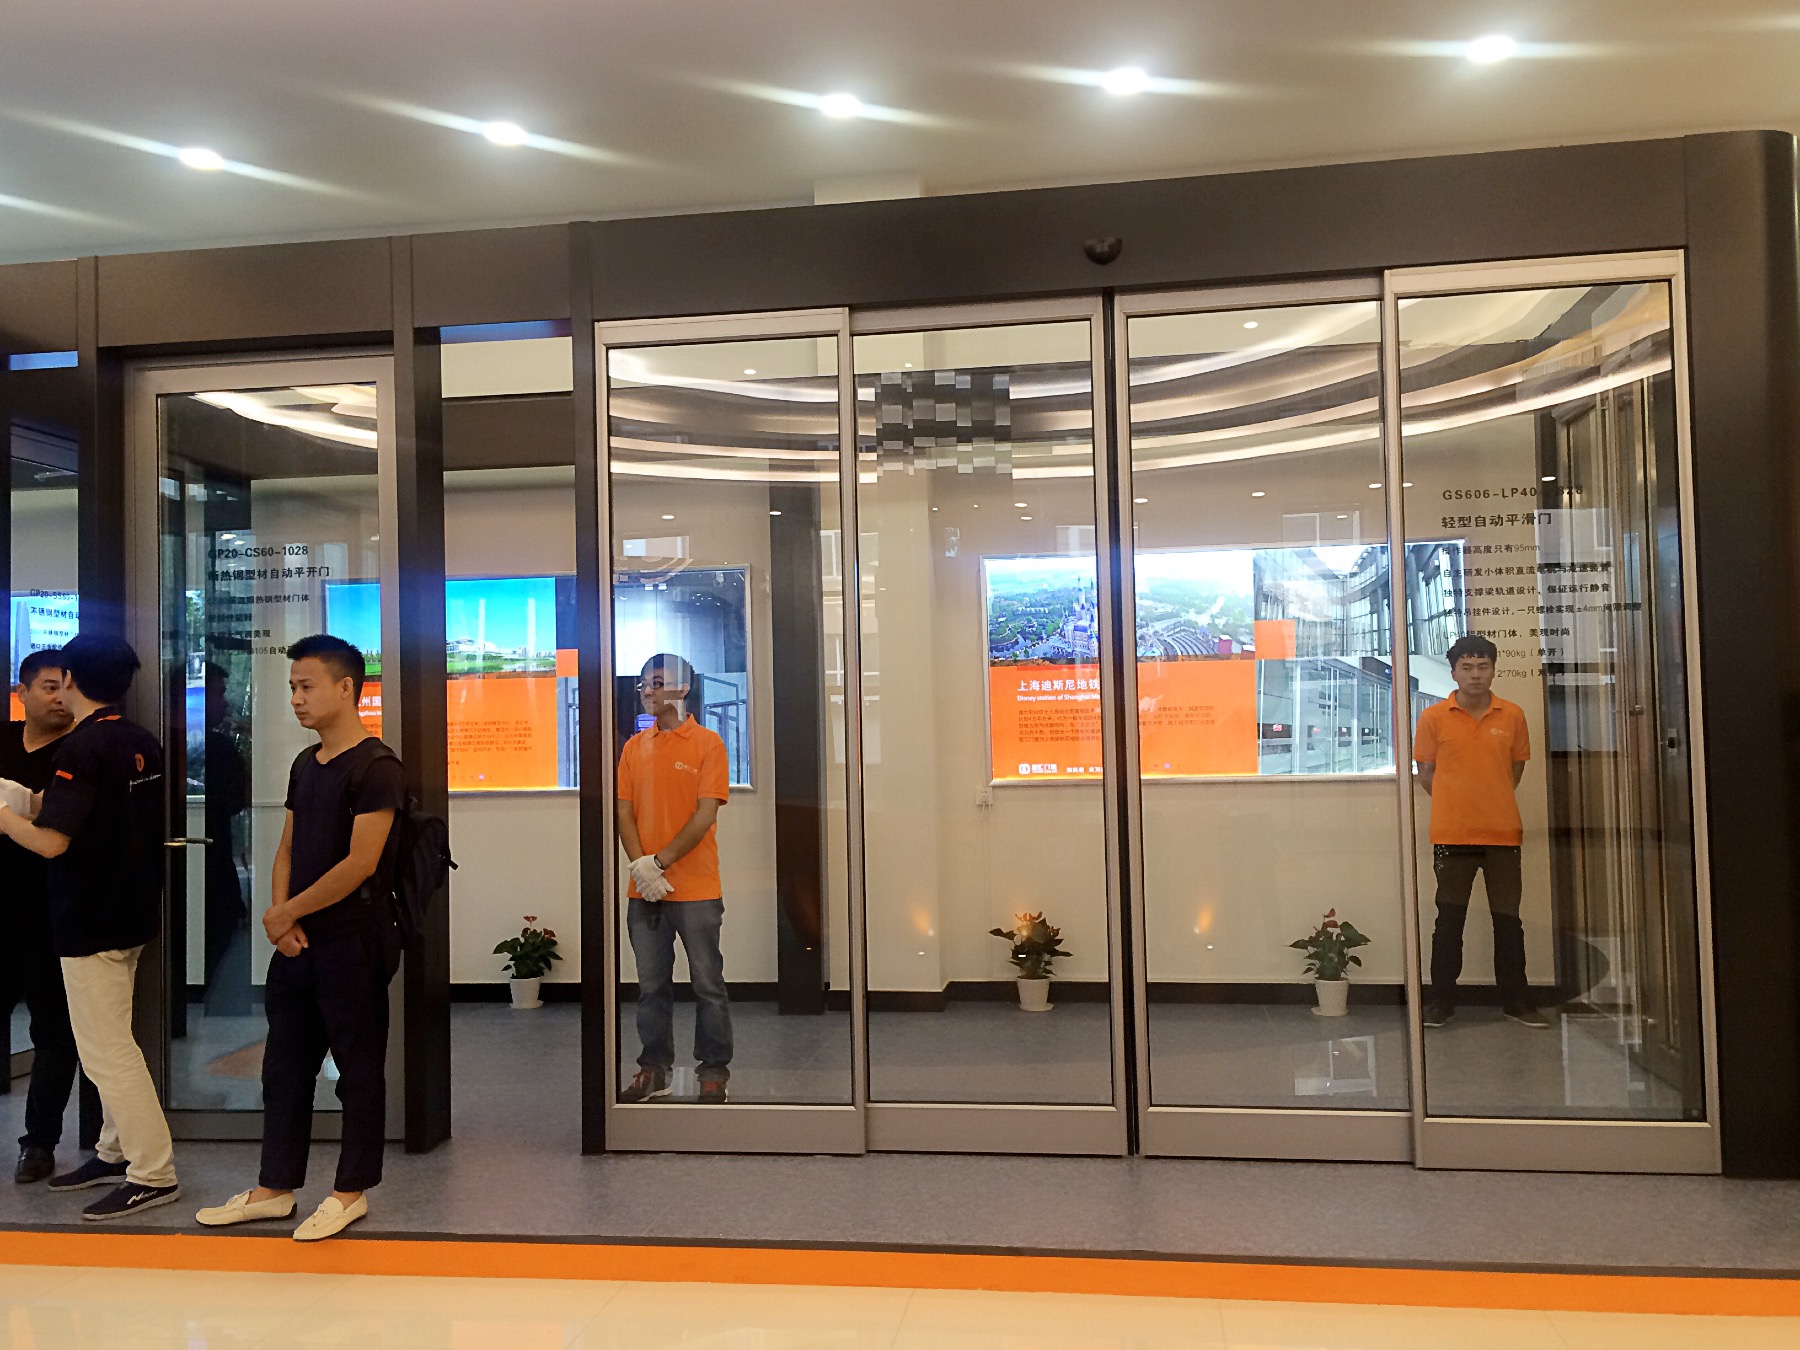 Commercial Automatic Sliding Door Operators with Intelligent Controllers